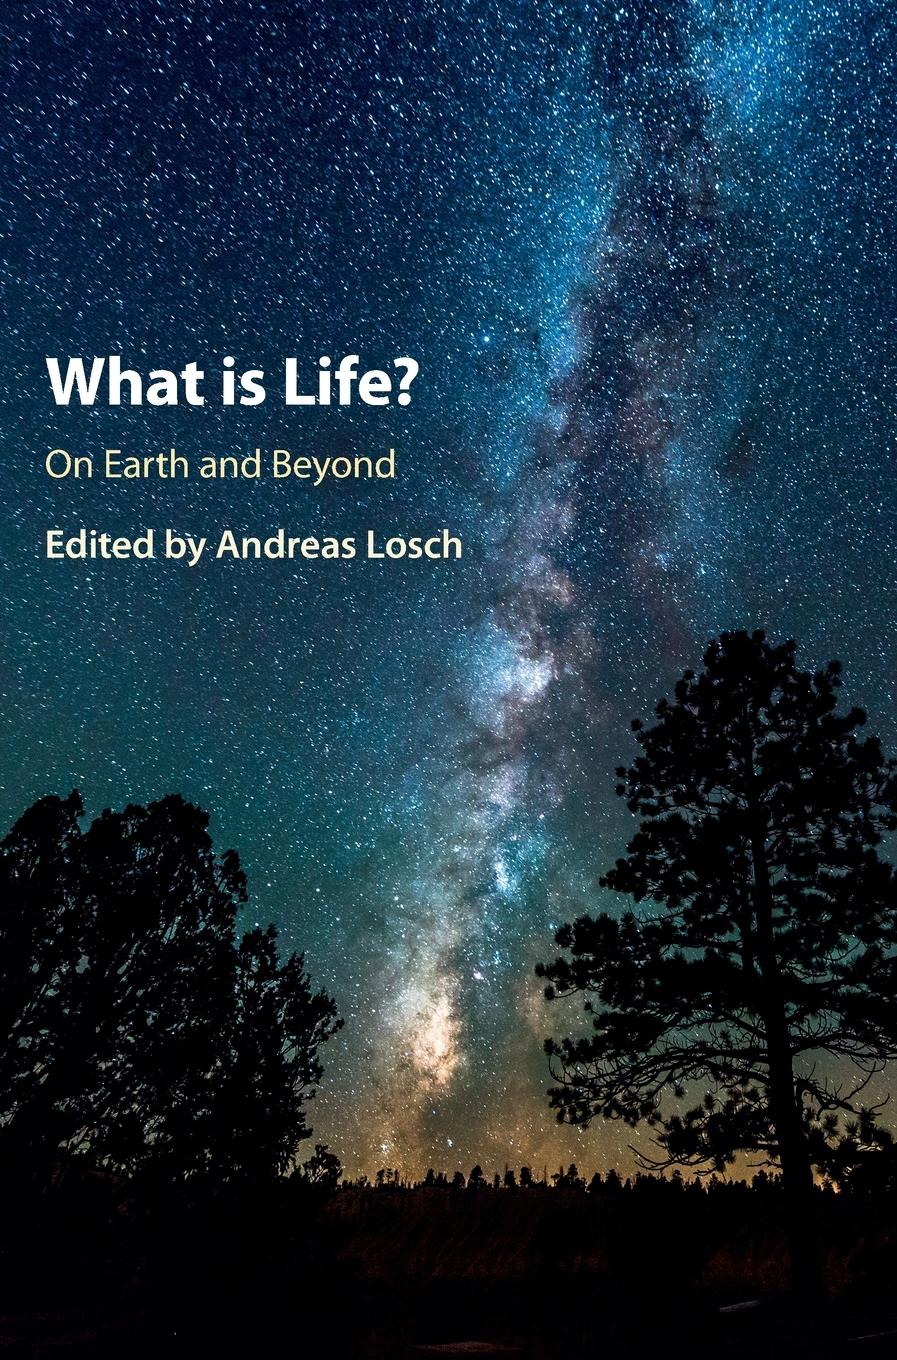 What is Life? On Earth and Beyond  Andreas Losch  Buch  Englisch  2017 - Losch, Andreas